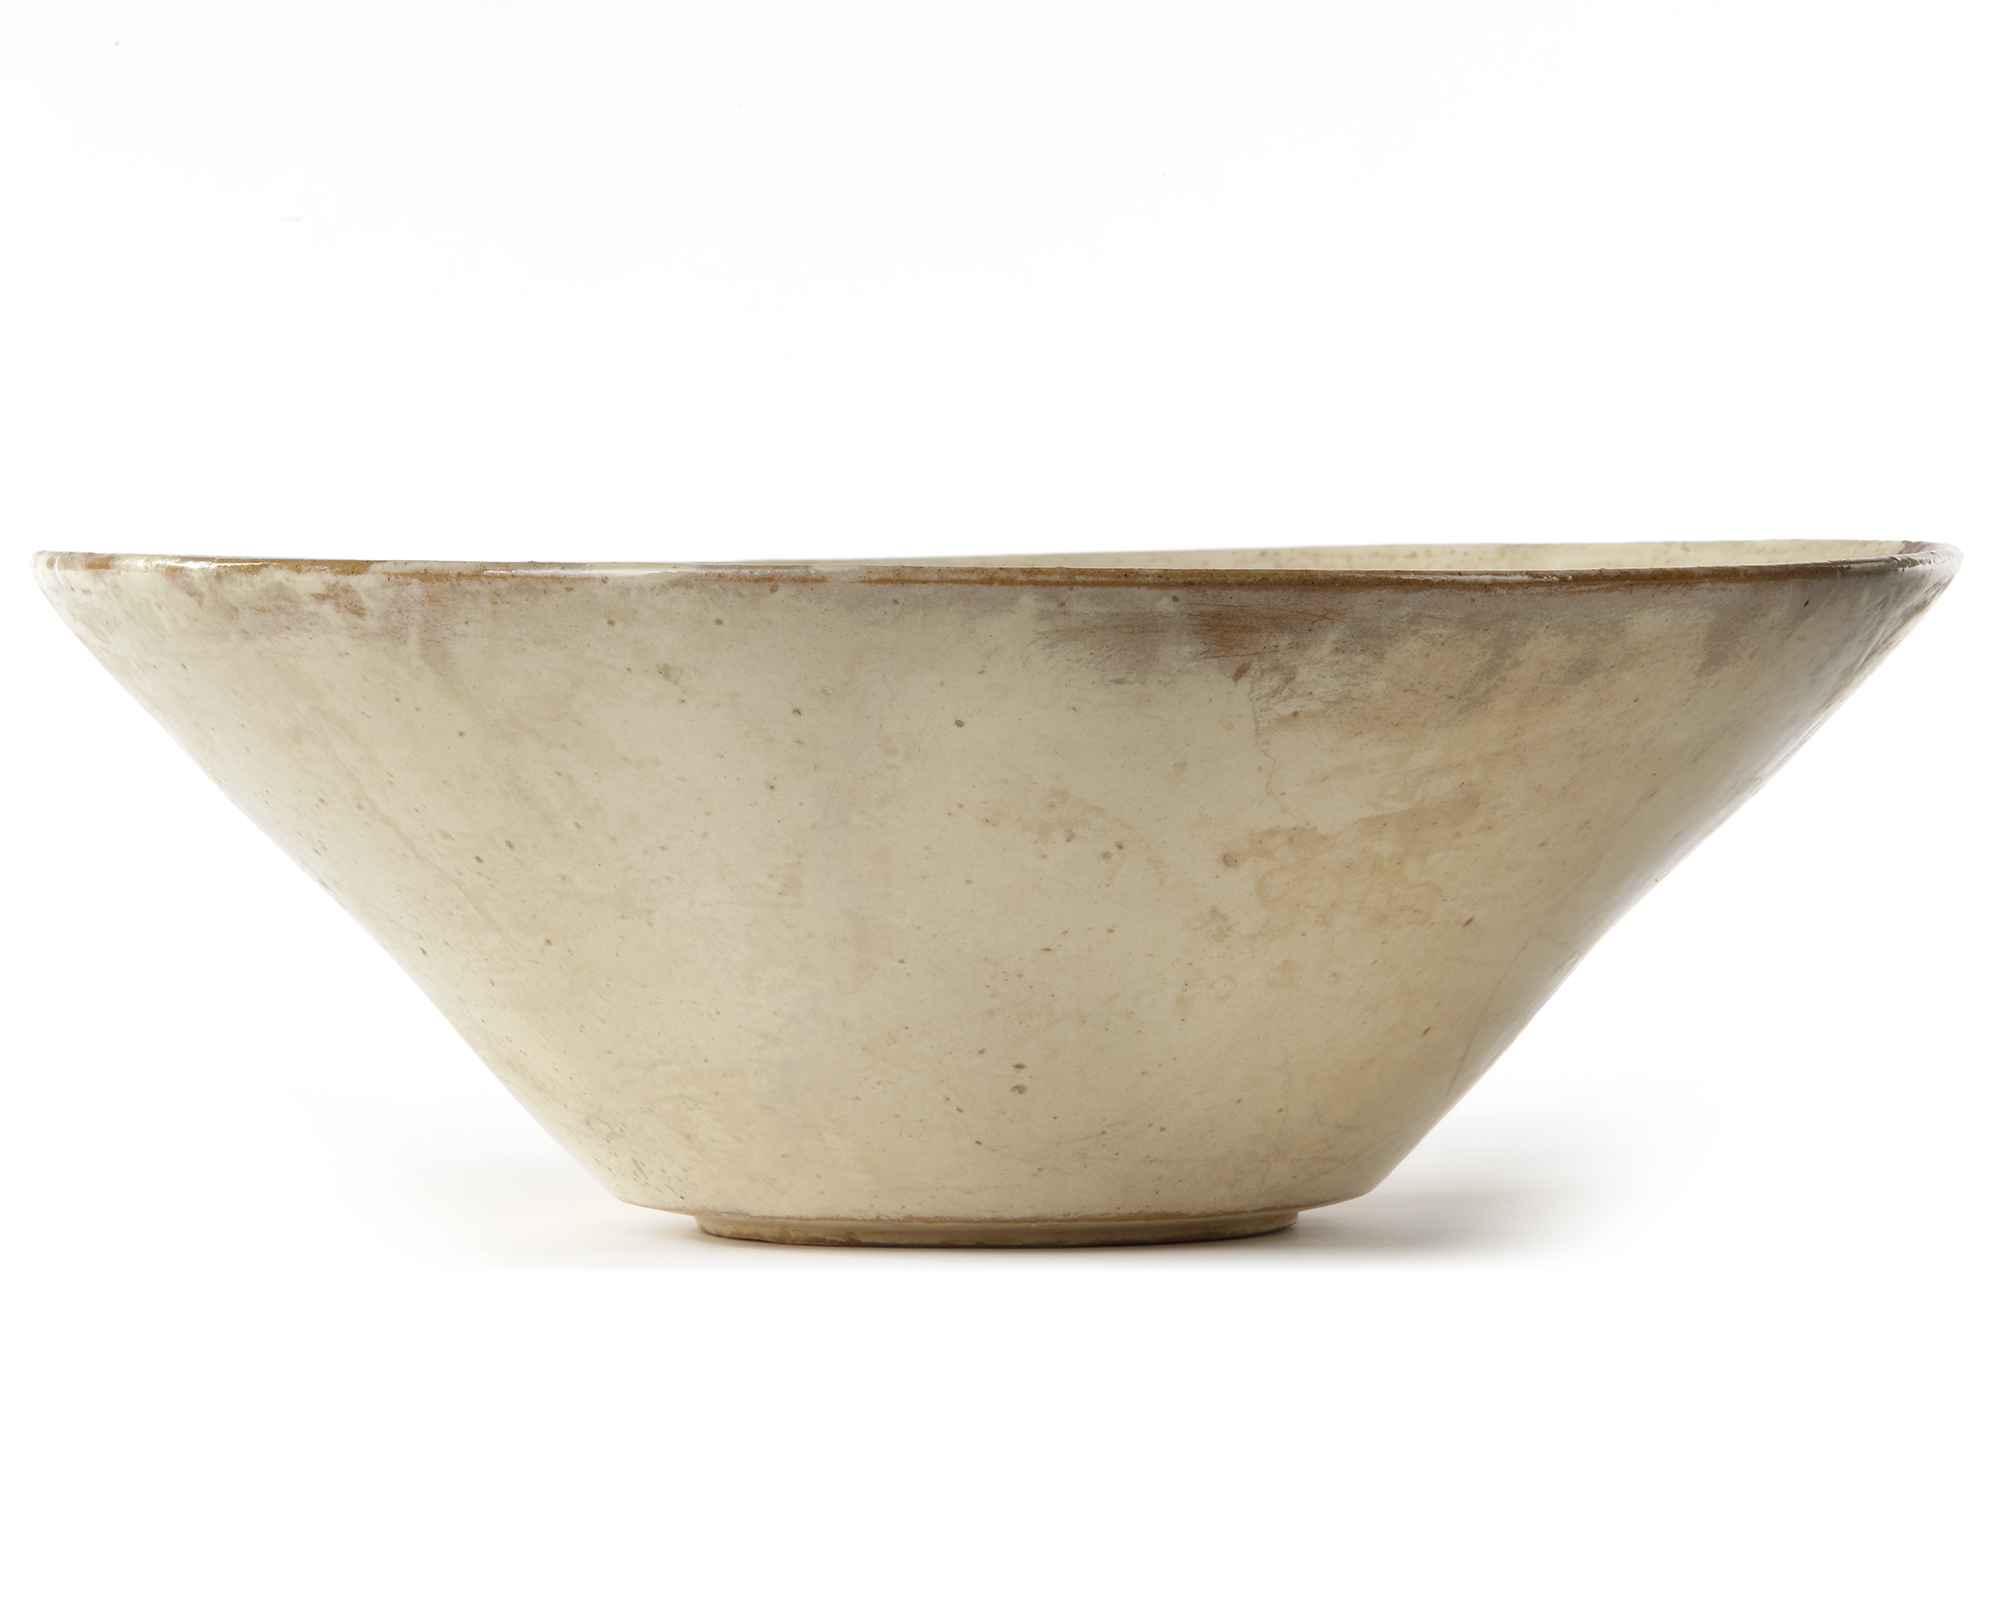 A NISHAPUR POTTERY BOWL, PERSIA, 10TH CENTURY - Image 4 of 4